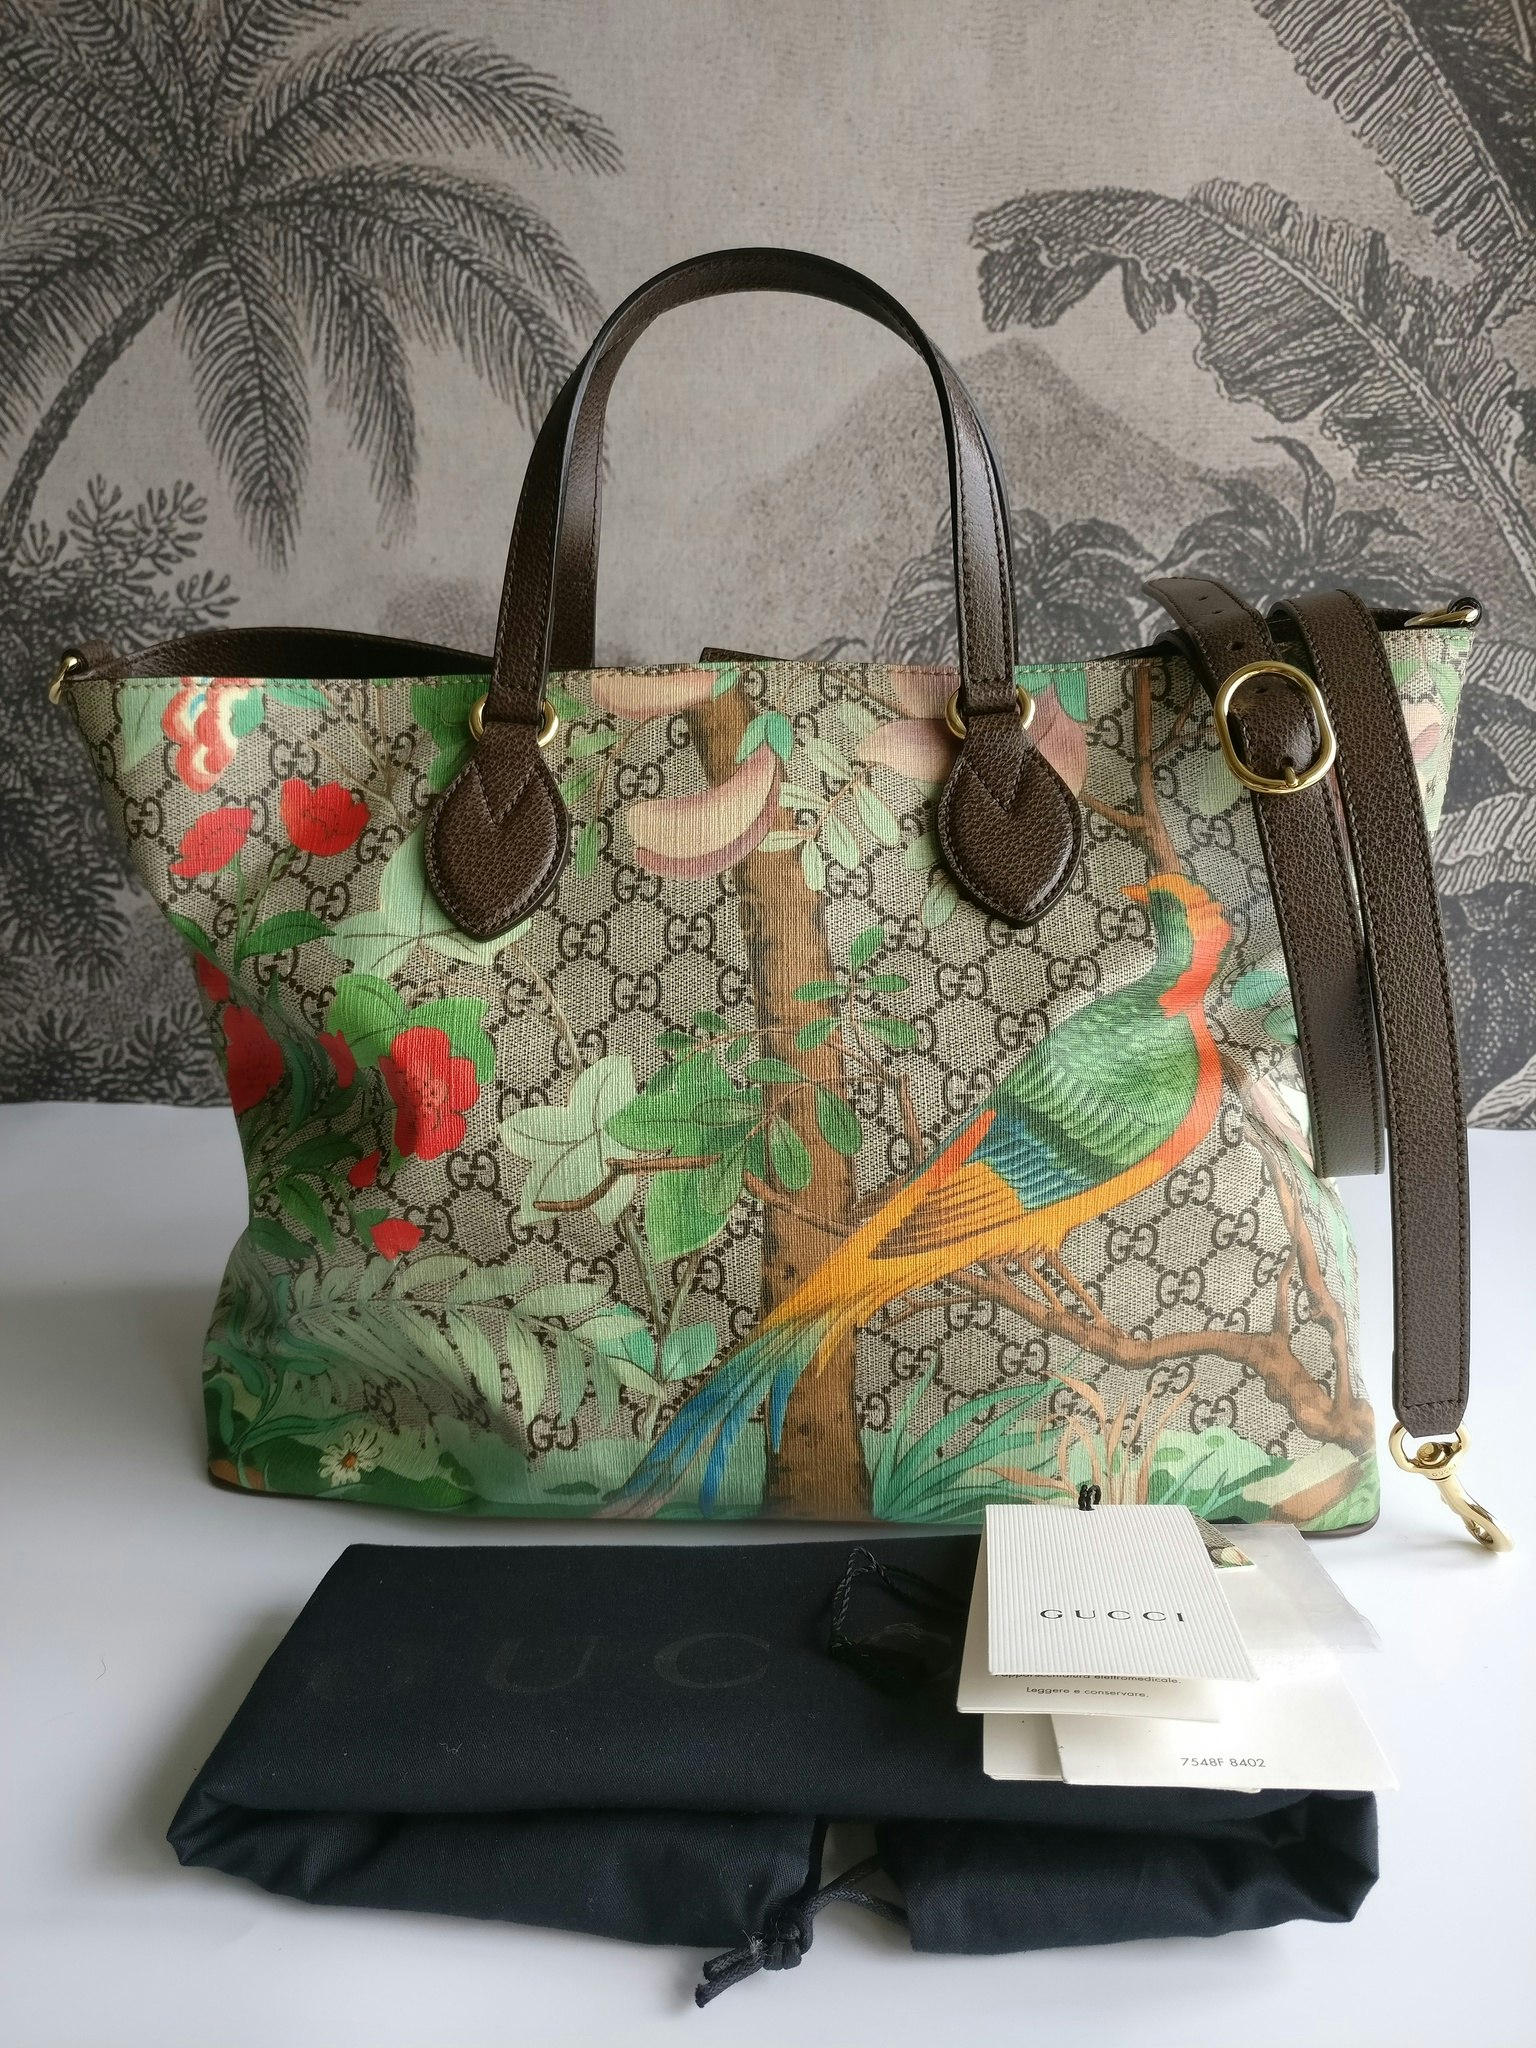 Gucci Soft GG Supreme Tian Floral Tote - Good or Bag